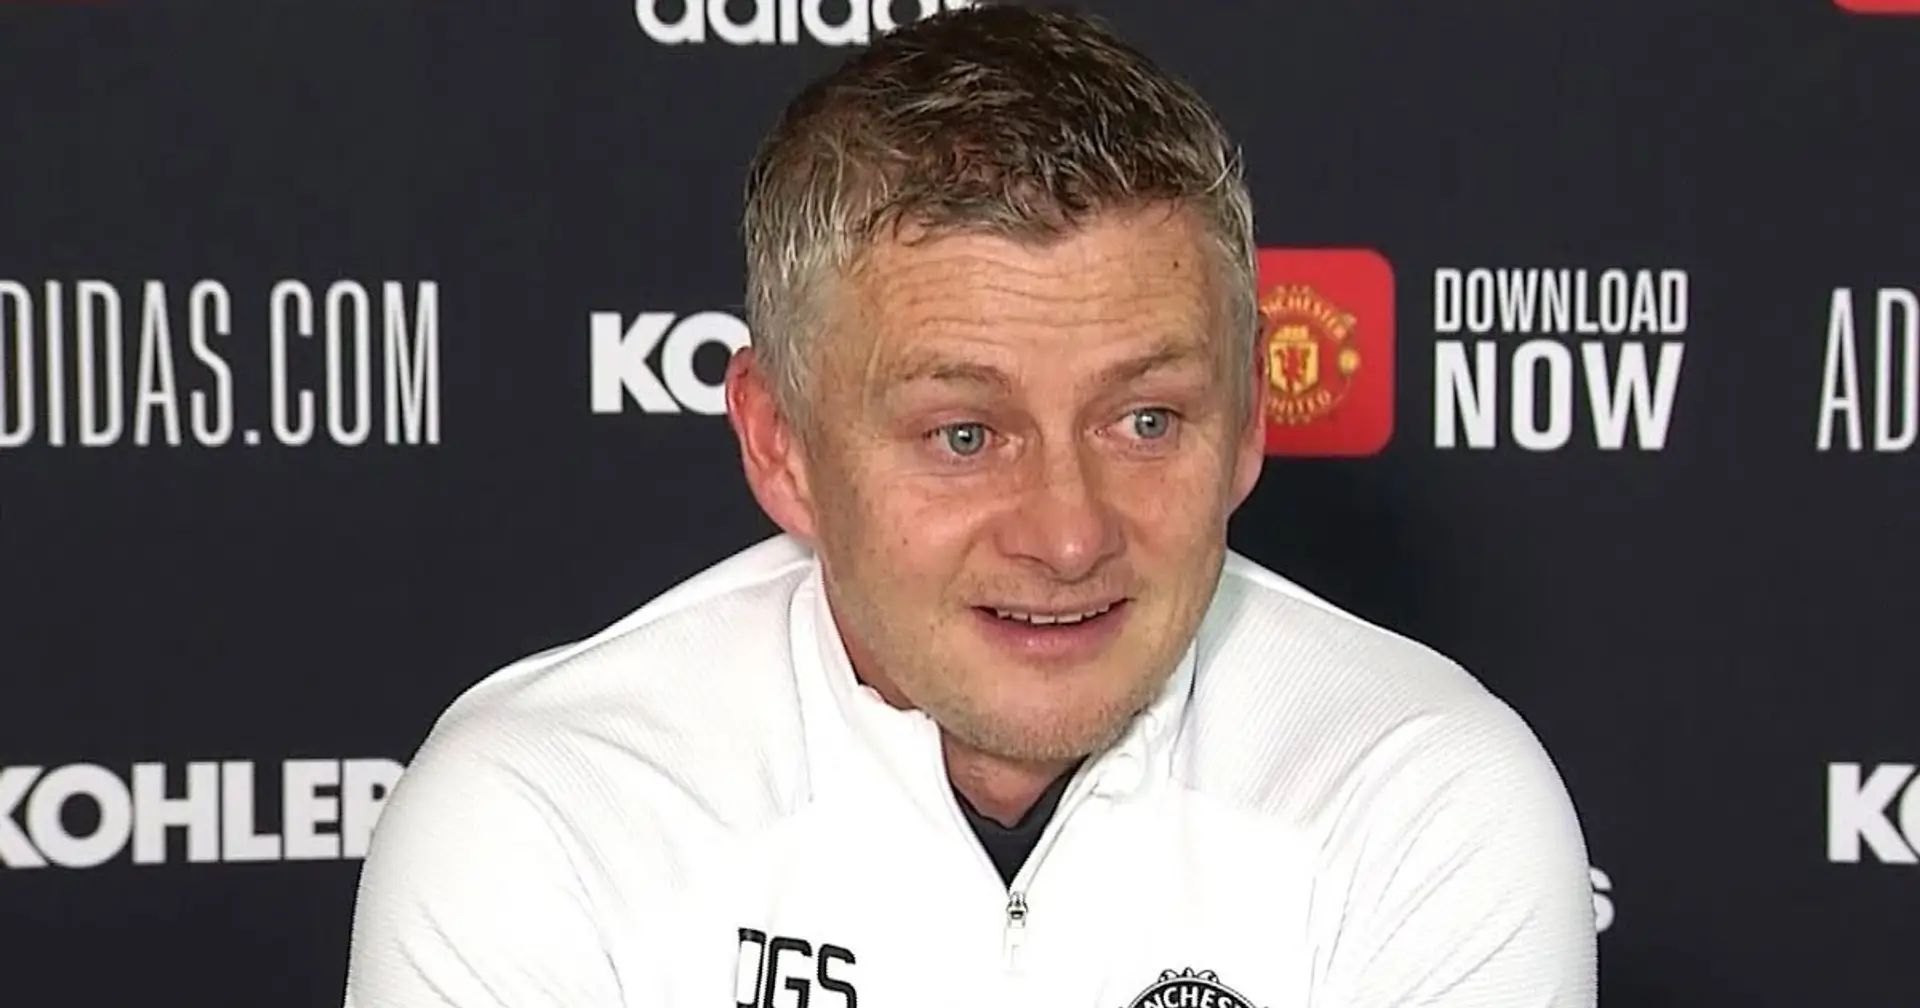 Solskjaer: ‘Our mindset is to win the Champions League group’